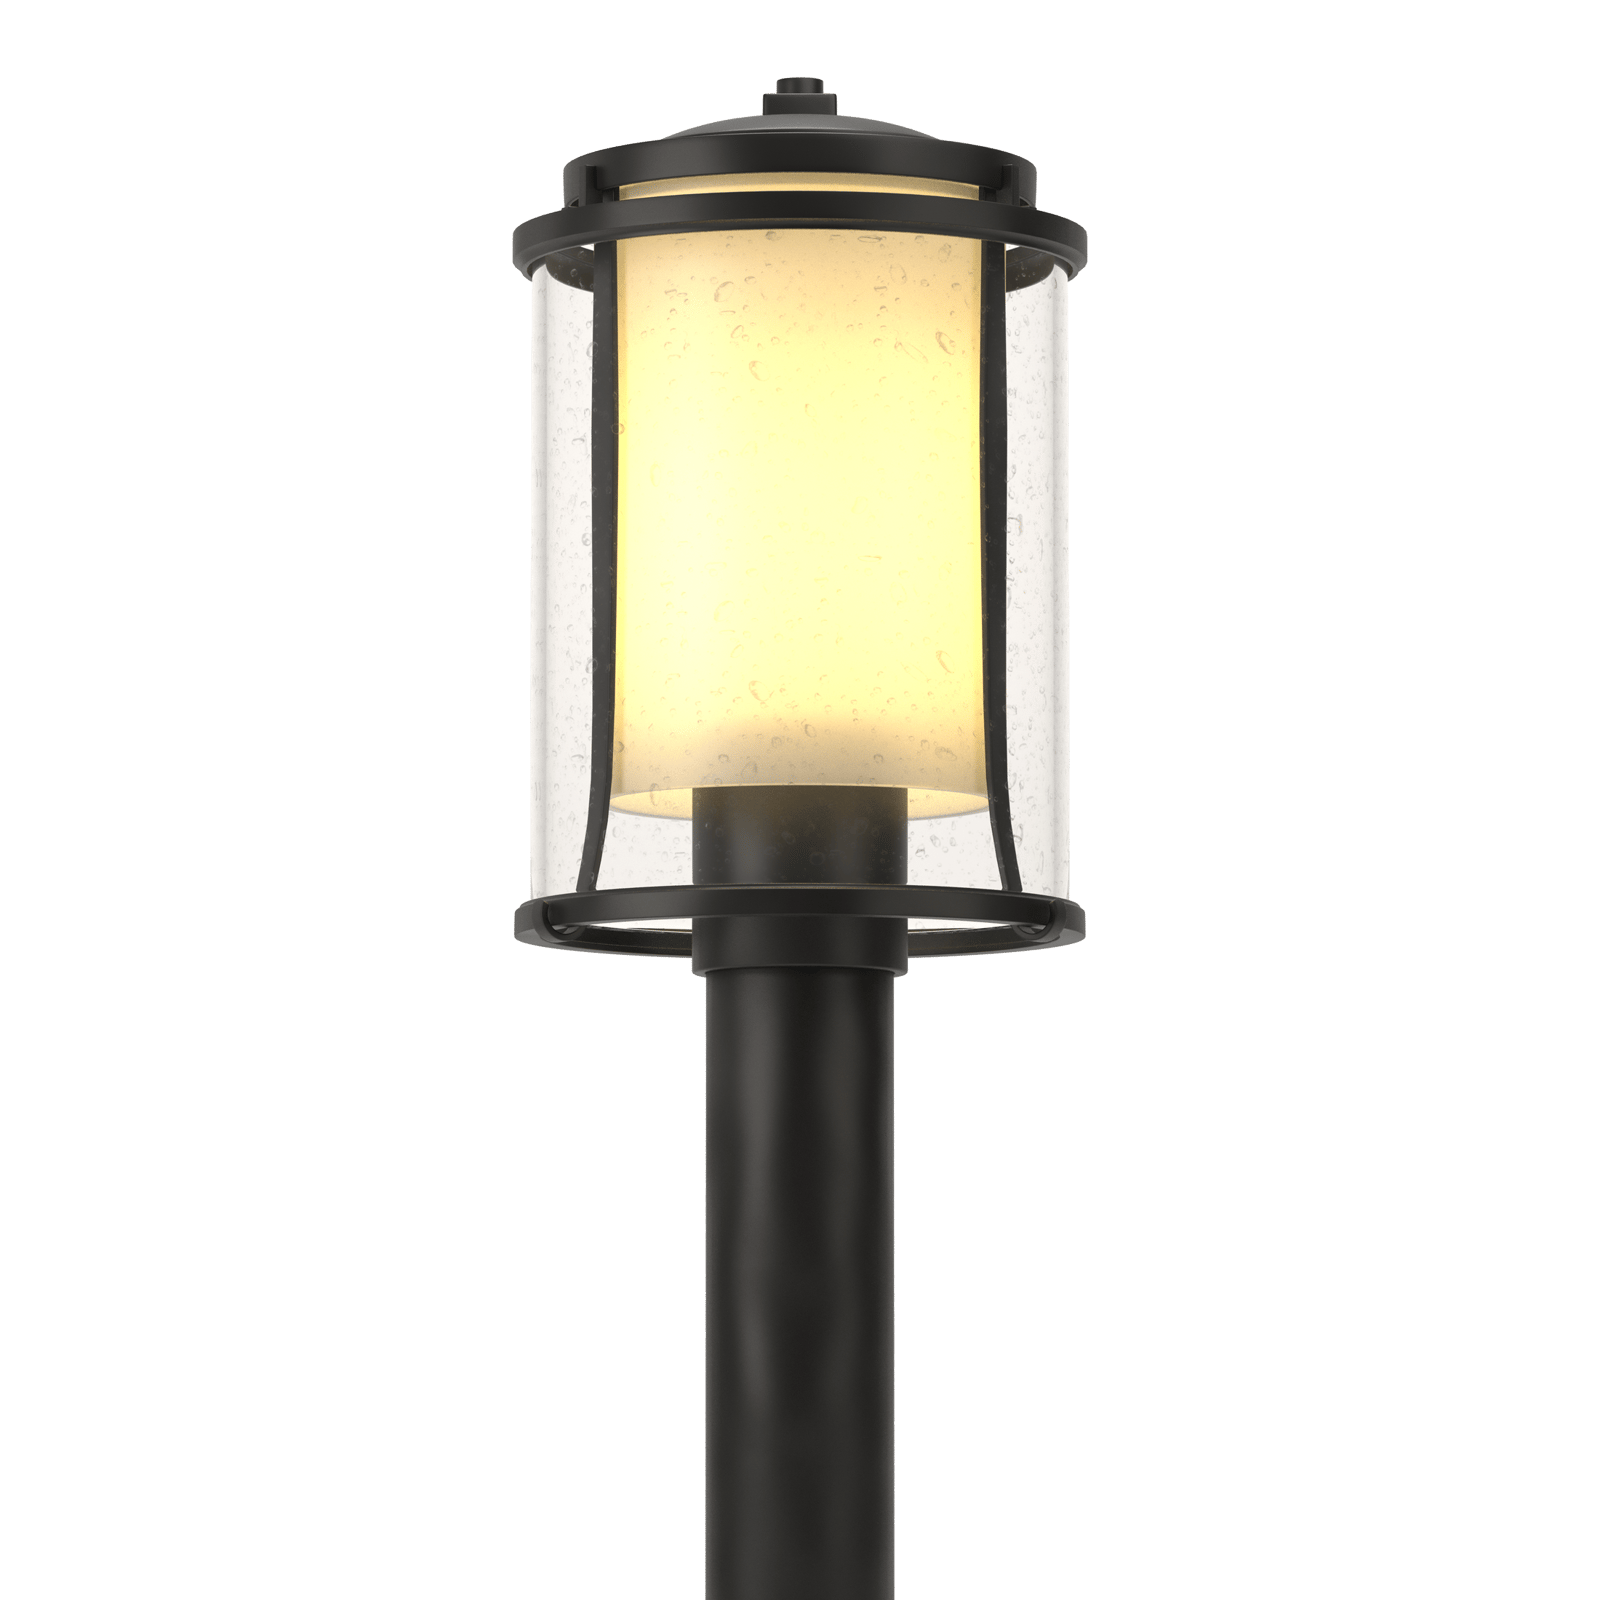 Hubbardton Forge Meridian Outdoor Post Light Outdoor l Post/Pier Mounts Hubbardton Forge Coastal Black Seeded Glass with Opal Diffuser (ZS) 